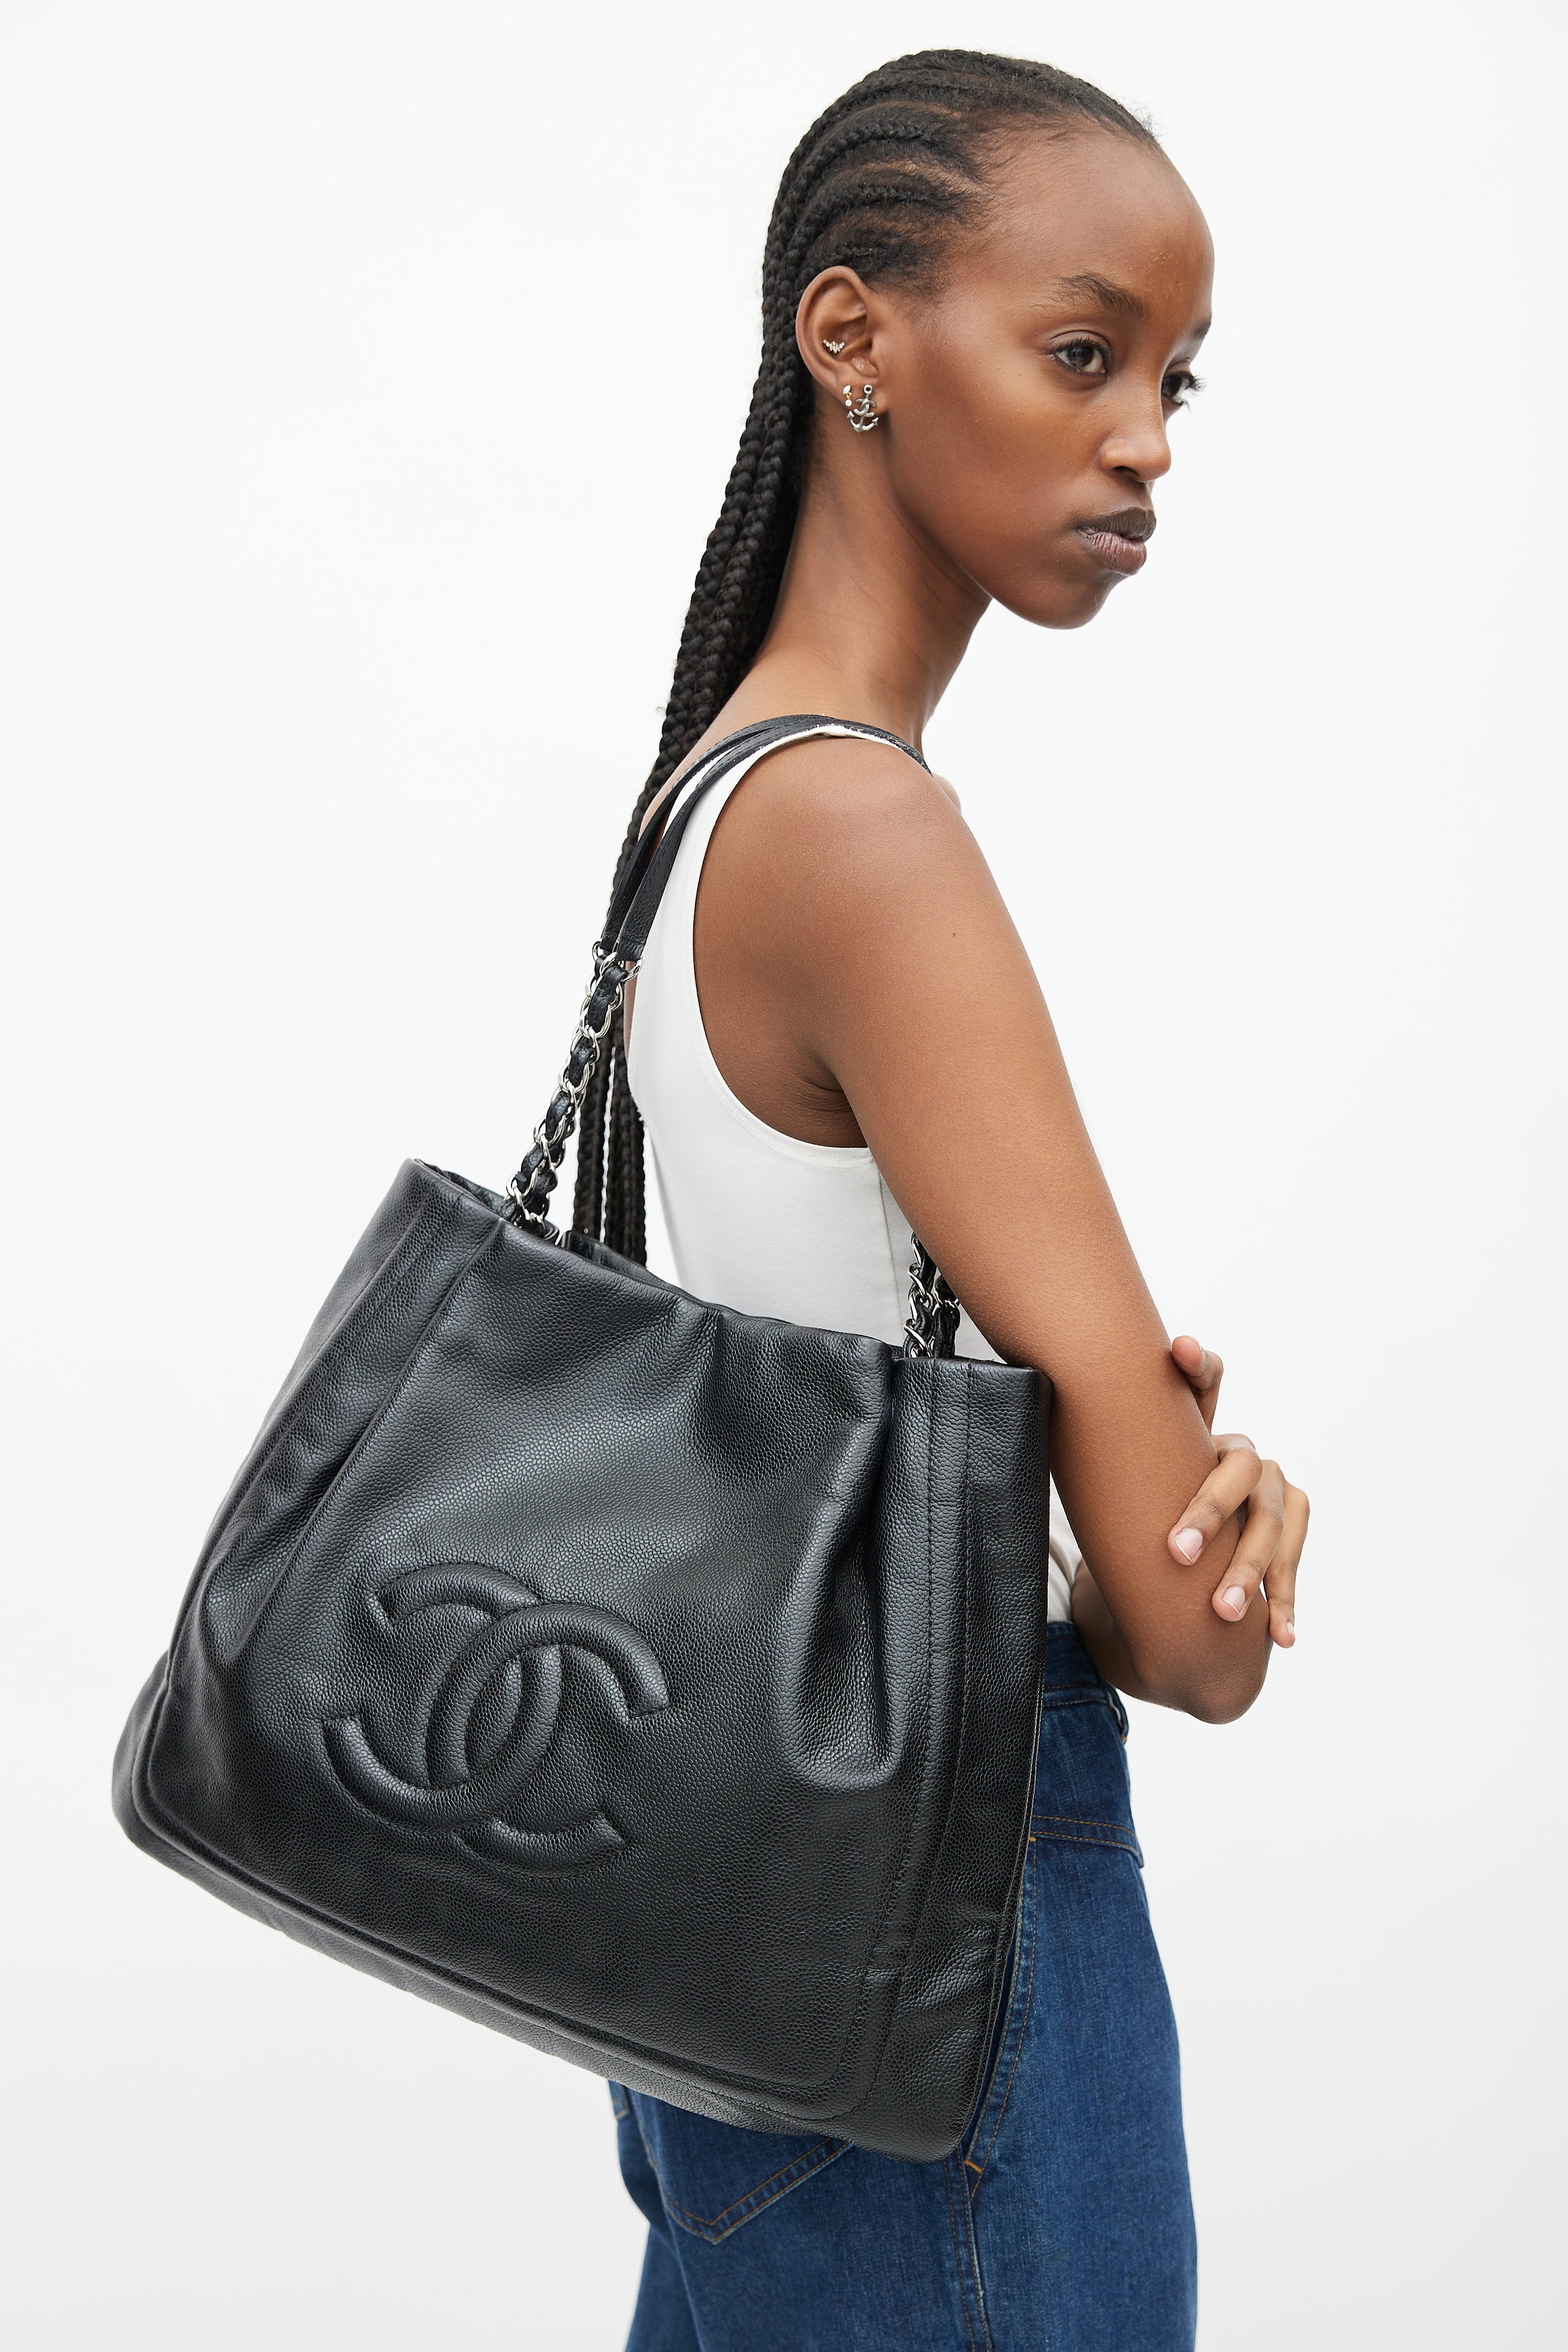 Chanel // 2011 Black Leather Pleated Timeless Tote Bag – VSP